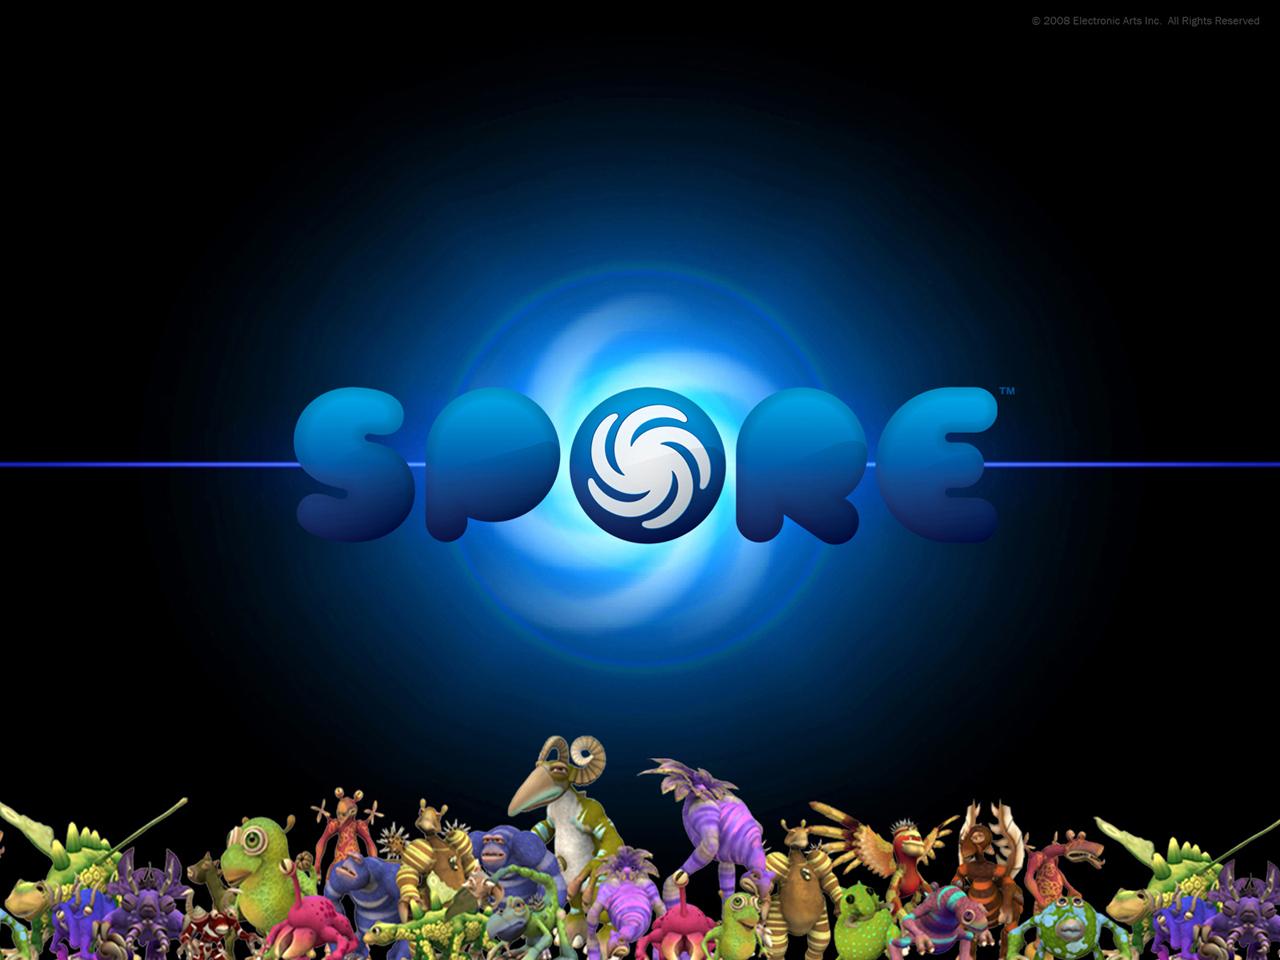 Spore Wallpapers